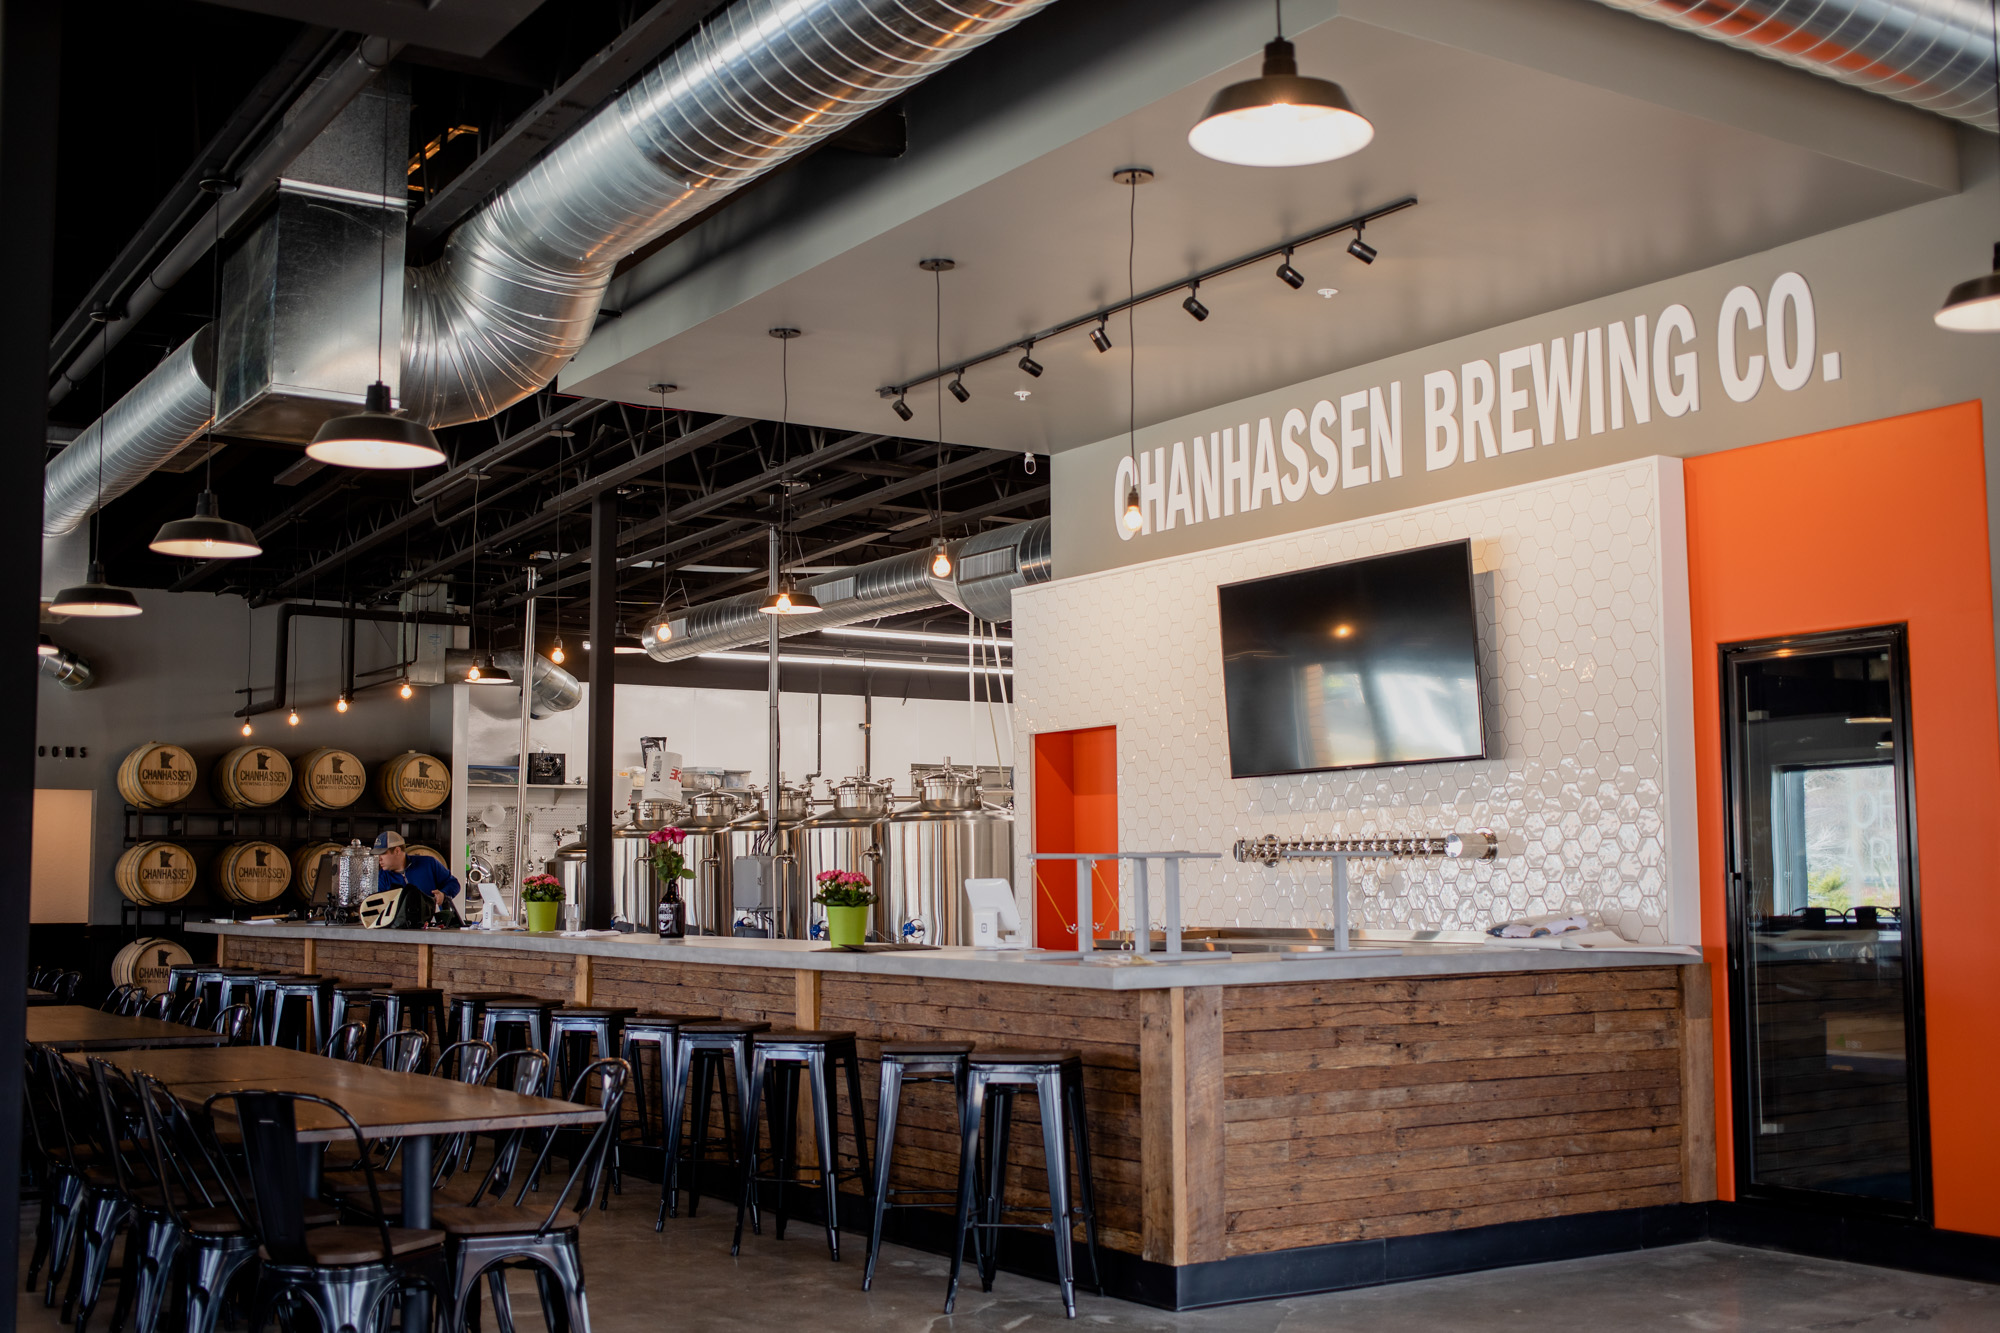 Chanhassen Brewing Company's taproom opens on April 15 • Photo by Jordan Wipf